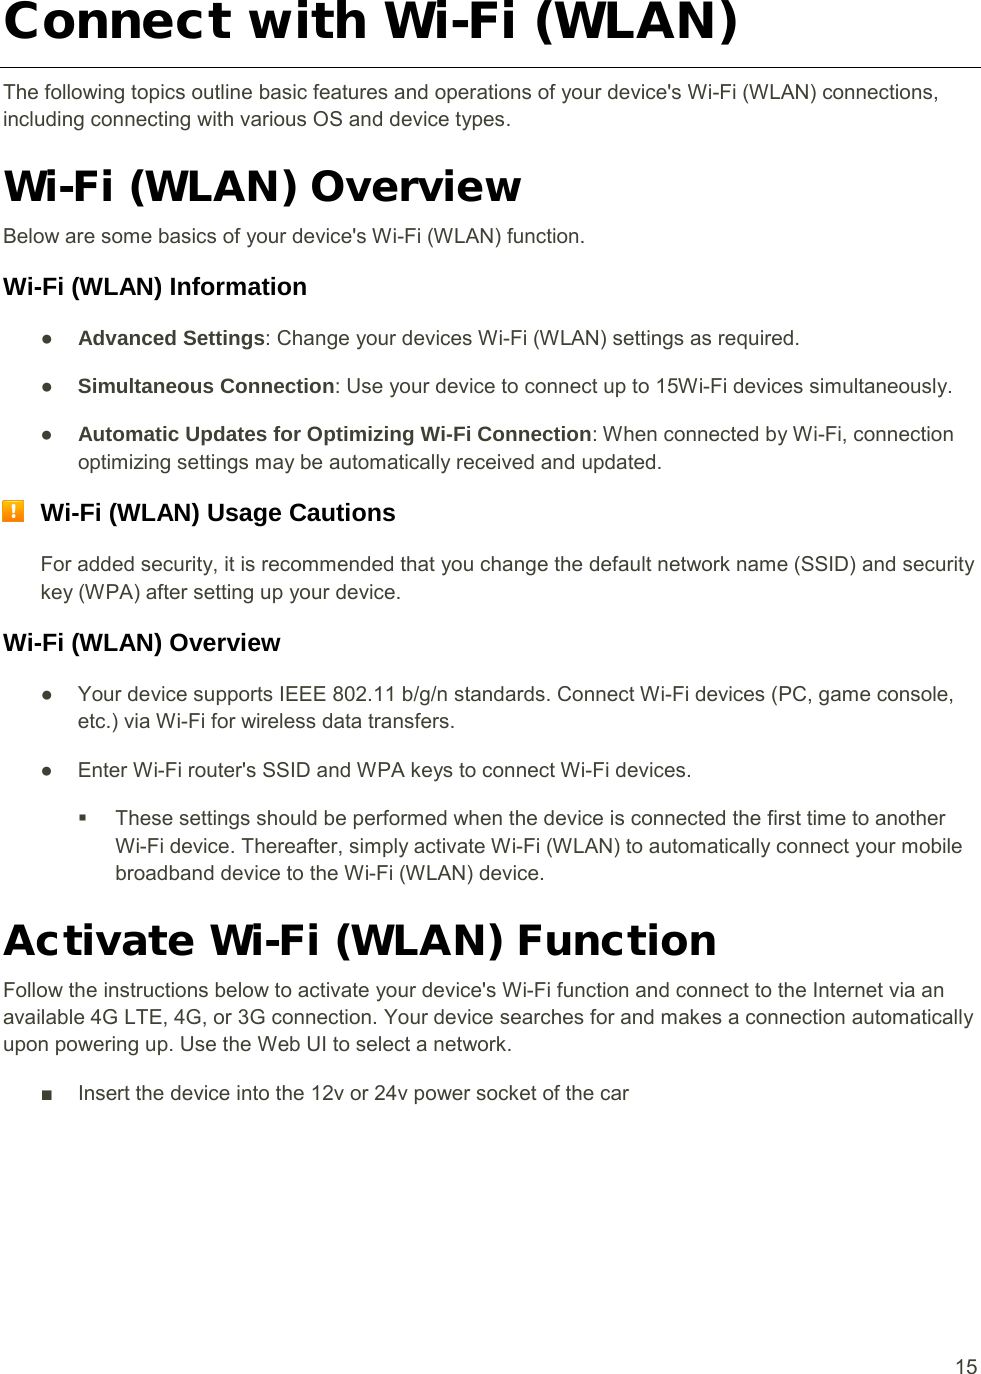  15 Connect with Wi-Fi (WLAN) The following topics outline basic features and operations of your device&apos;s Wi-Fi (WLAN) connections, including connecting with various OS and device types. Wi-Fi (WLAN) Overview Below are some basics of your device&apos;s Wi-Fi (WLAN) function. Wi-Fi (WLAN) Information ● Advanced Settings● : Change your devices Wi-Fi (WLAN) settings as required.  Simultaneous Connection● : Use your device to connect up to 15Wi-Fi devices simultaneously.  Automatic Updates for Optimizing Wi-Fi Connection: When connected by Wi-Fi, connection optimizing settings may be automatically received and updated.  Wi-Fi (WLAN) Usage Cautions For added security, it is recommended that you change the default network name (SSID) and security key (WPA) after setting up your device. Wi-Fi (WLAN) Overview  ● Your device supports IEEE 802.11 b/g/n standards. Connect Wi-Fi devices (PC, game console, etc.) via Wi-Fi for wireless data transfers. ● Enter Wi-Fi router&apos;s SSID and WPA keys to connect Wi-Fi devices.  These settings should be performed when the device is connected the first time to another Wi-Fi device. Thereafter, simply activate Wi-Fi (WLAN) to automatically connect your mobile broadband device to the Wi-Fi (WLAN) device. Activate Wi-Fi (WLAN) Function Follow the instructions below to activate your device&apos;s Wi-Fi function and connect to the Internet via an available 4G LTE, 4G, or 3G connection. Your device searches for and makes a connection automatically upon powering up. Use the Web UI to select a network. ■ Insert the device into the 12v or 24v power socket of the car 